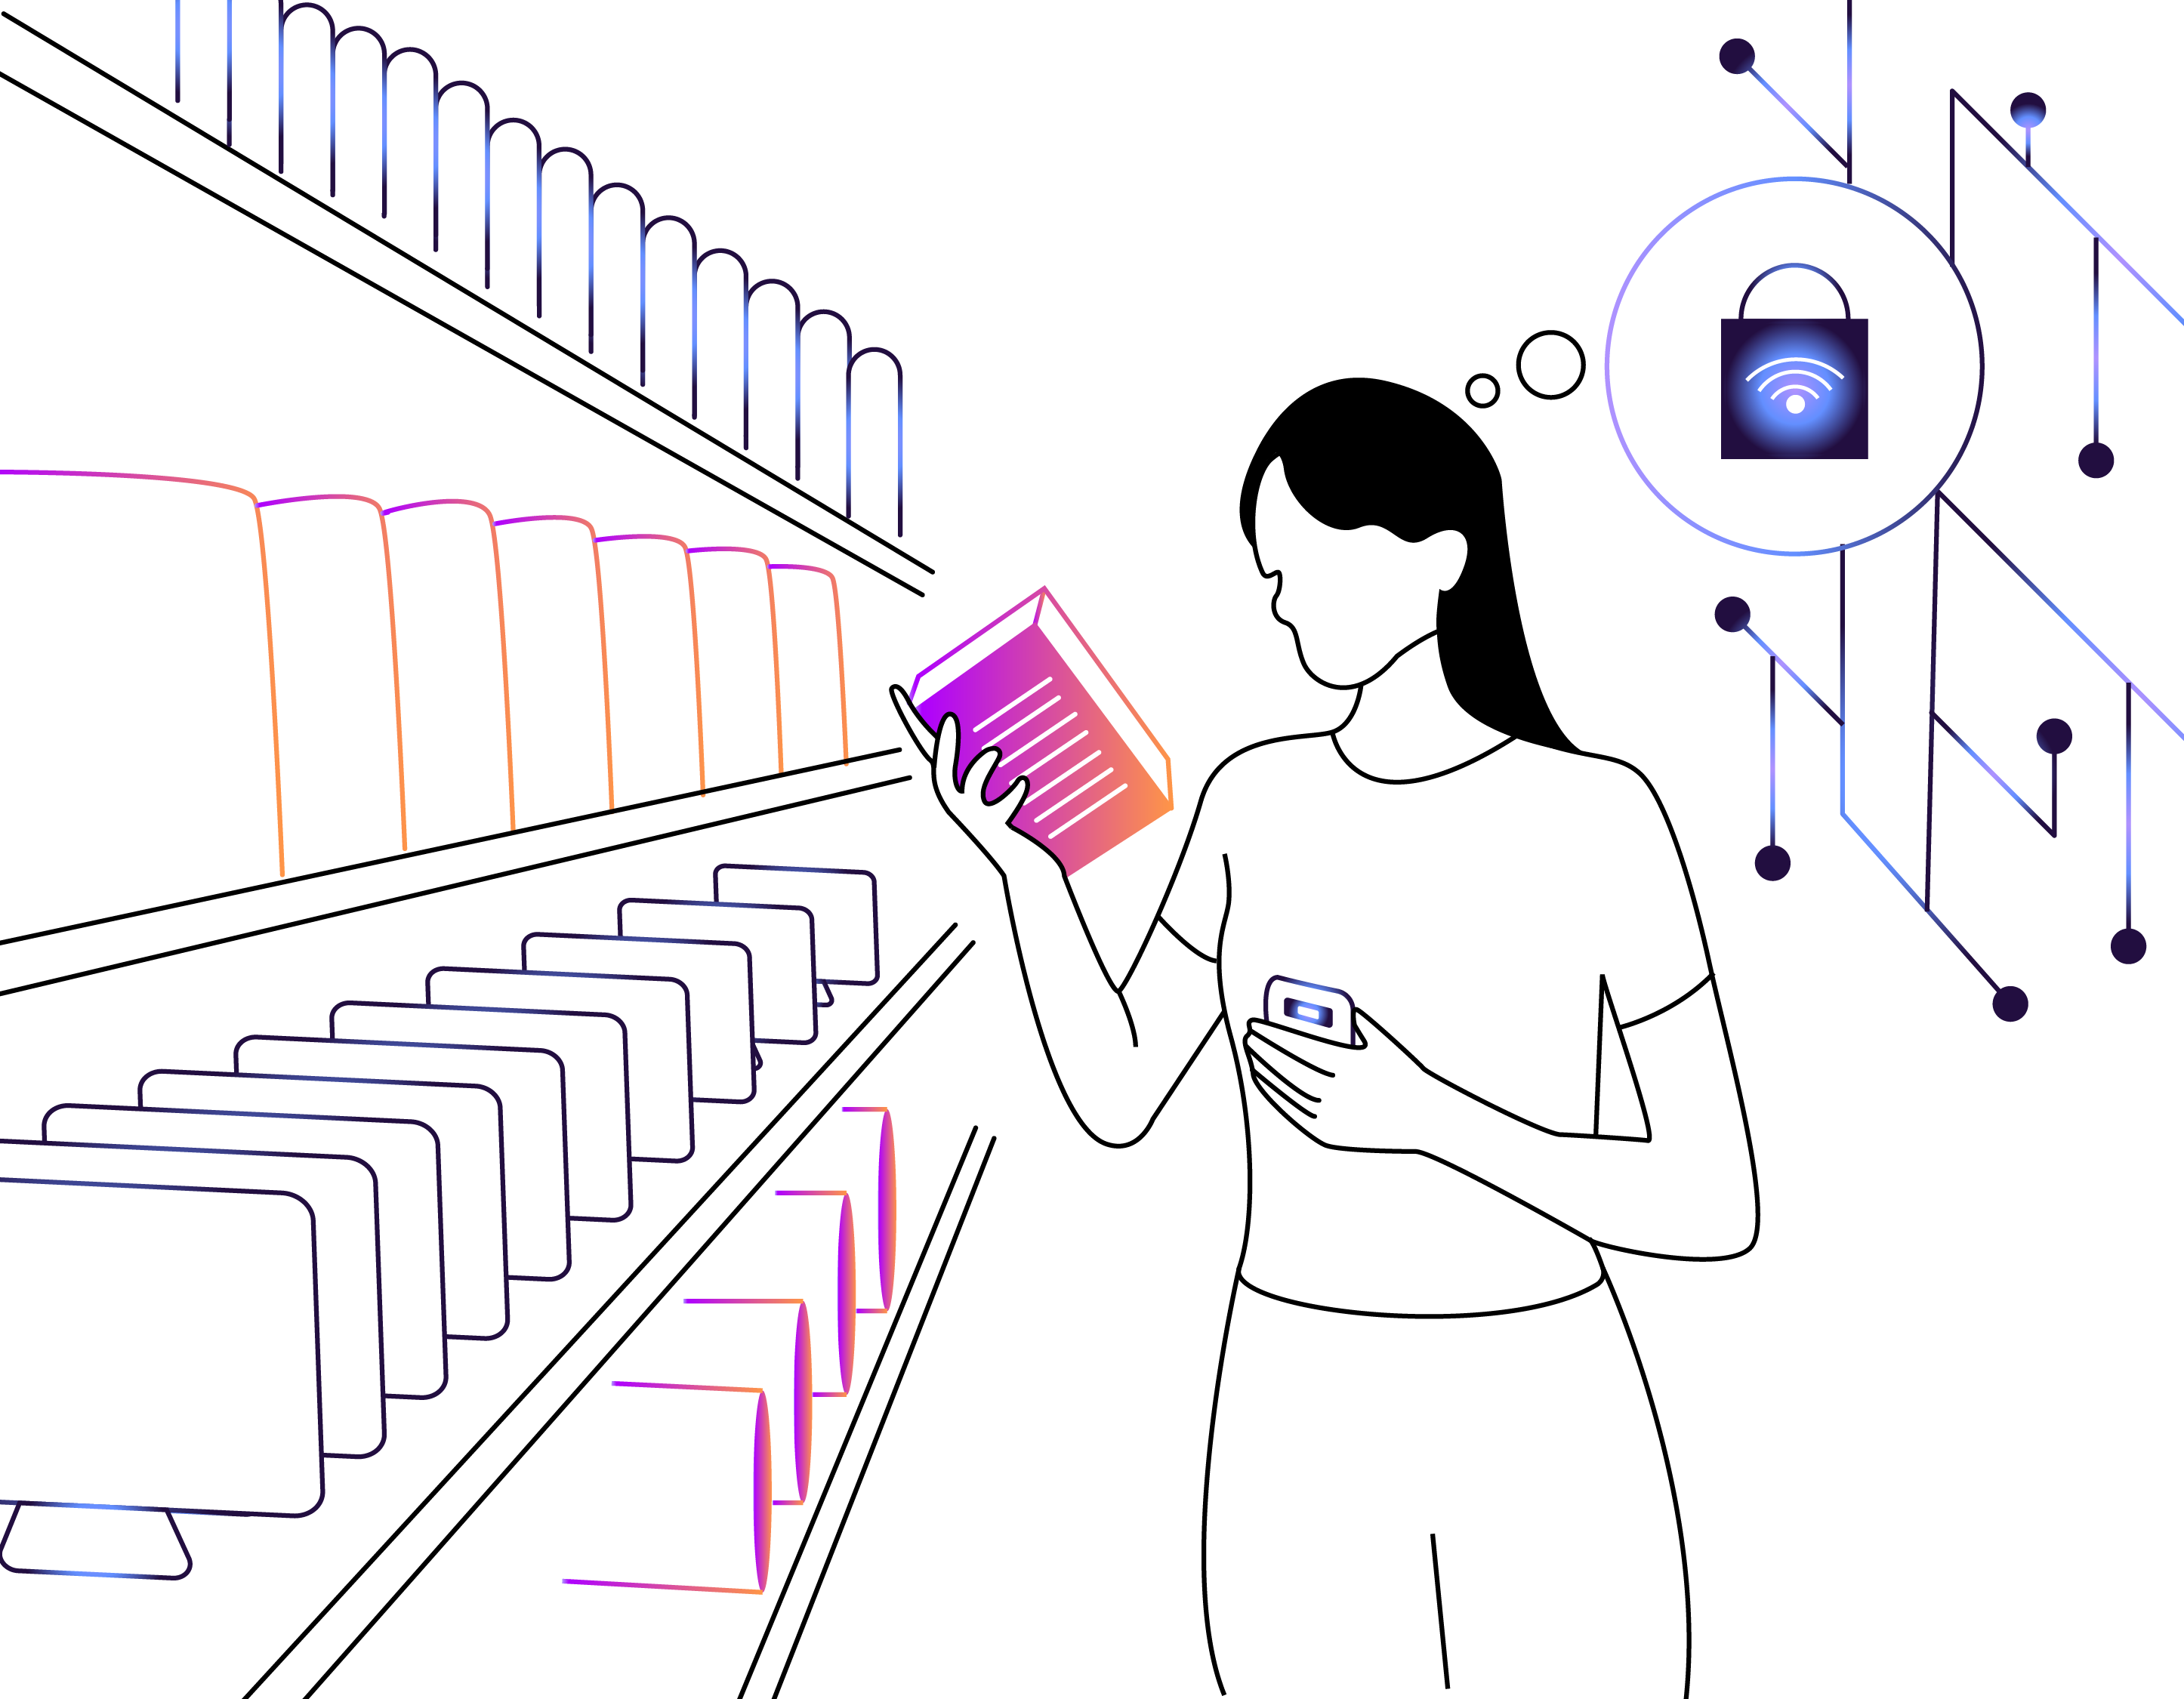 Line drawing: a woman in a store aisle examines a label while a thought bubble shows a padlock.